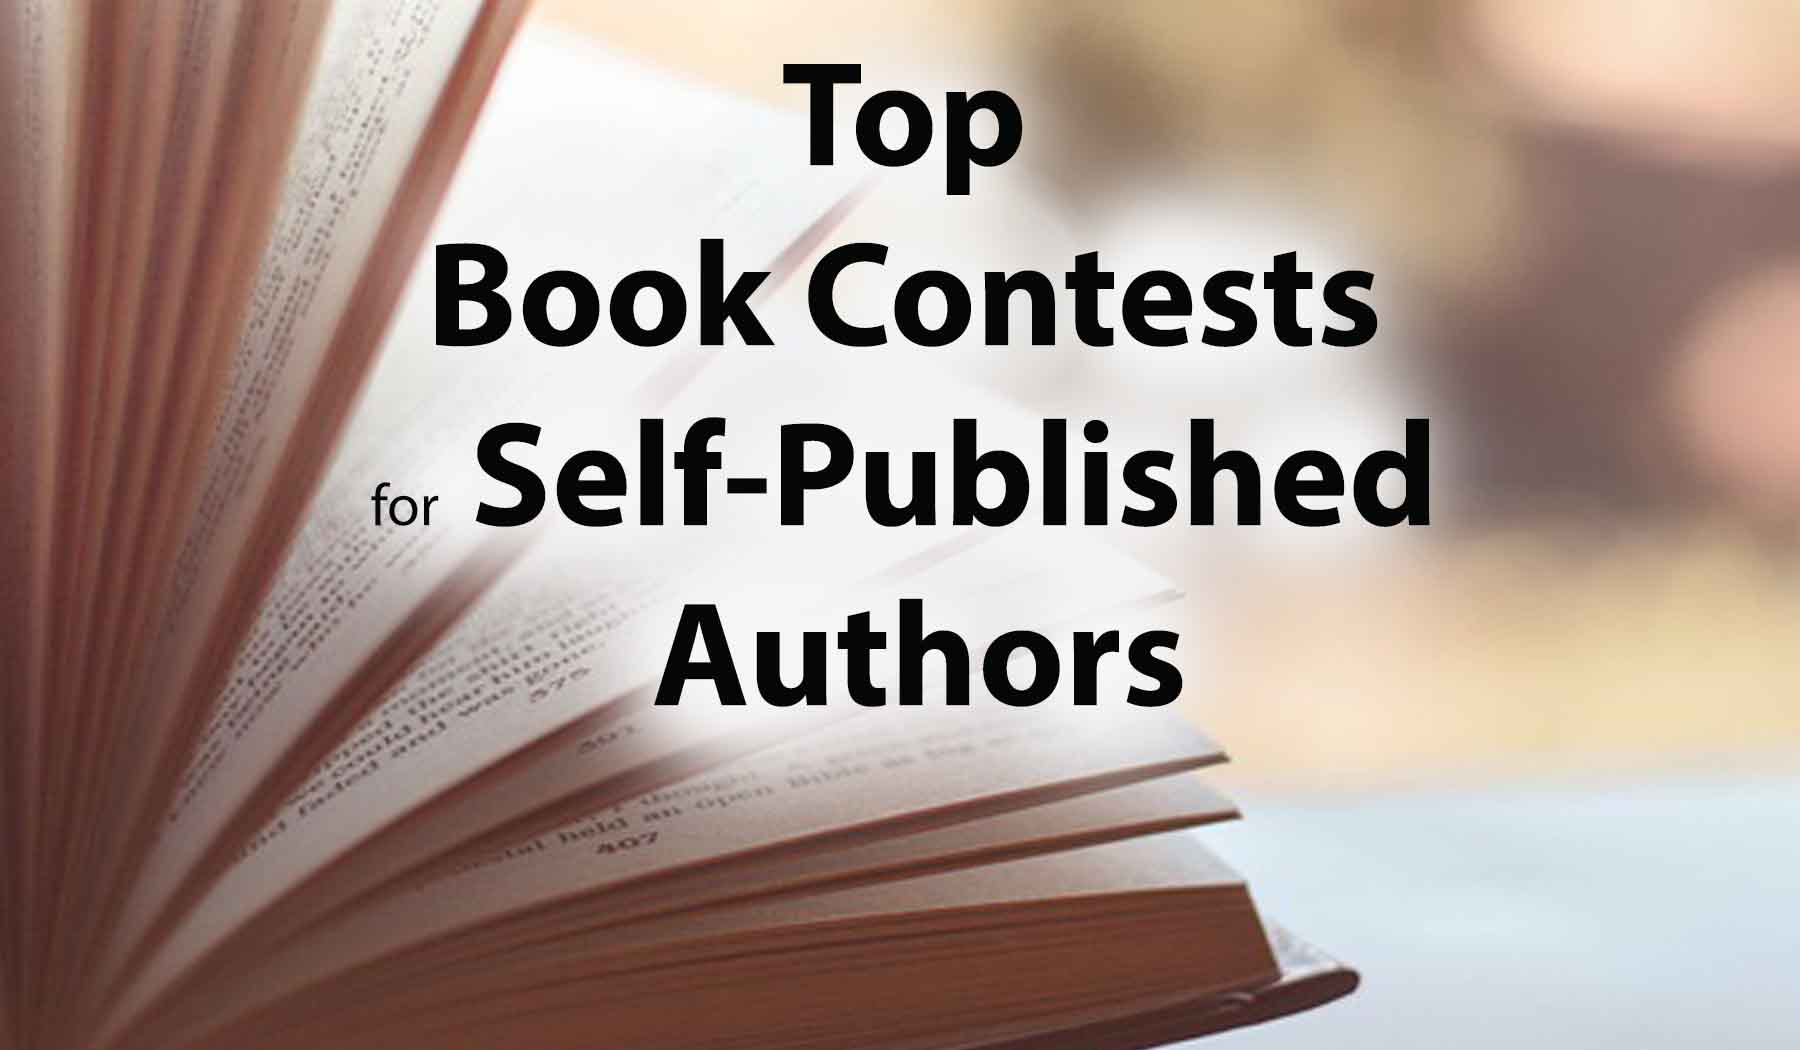 Top Book Contests for SelfPublished Authors Vincent and Friends